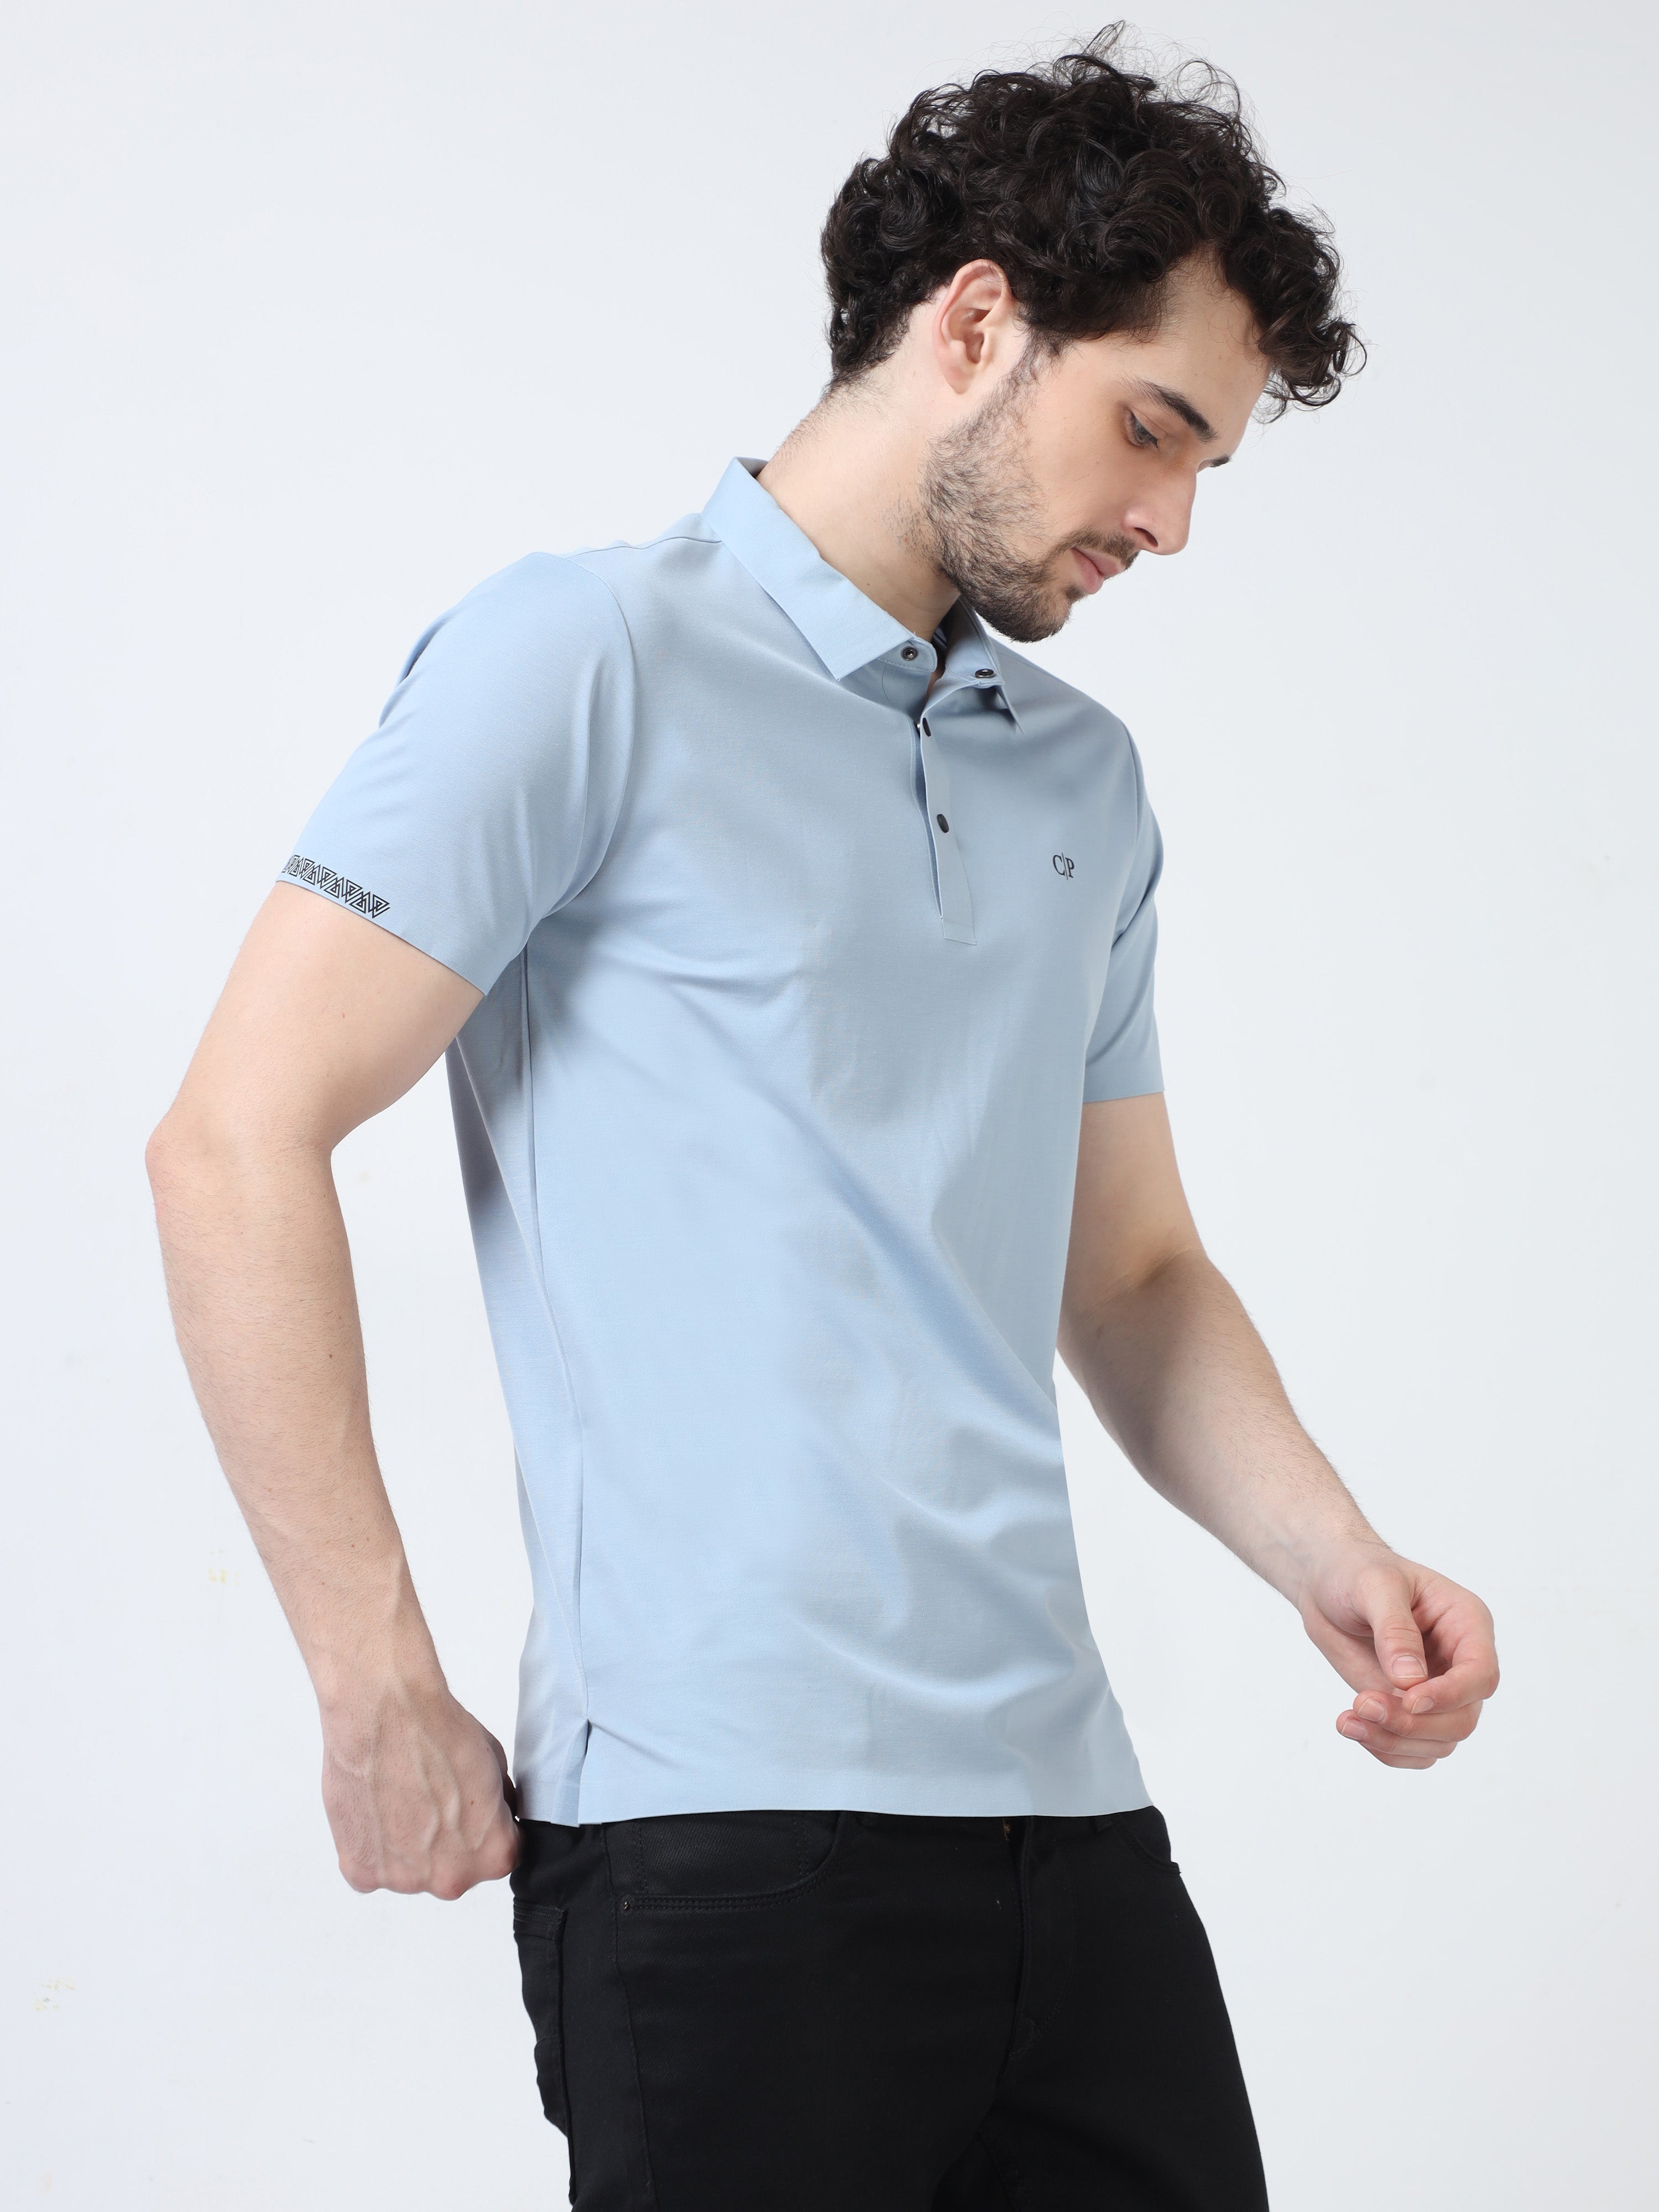 Classic Polo Men's Casual Solid Blue Half Sleeve T-Shirt | UNICO - 98 A SF P